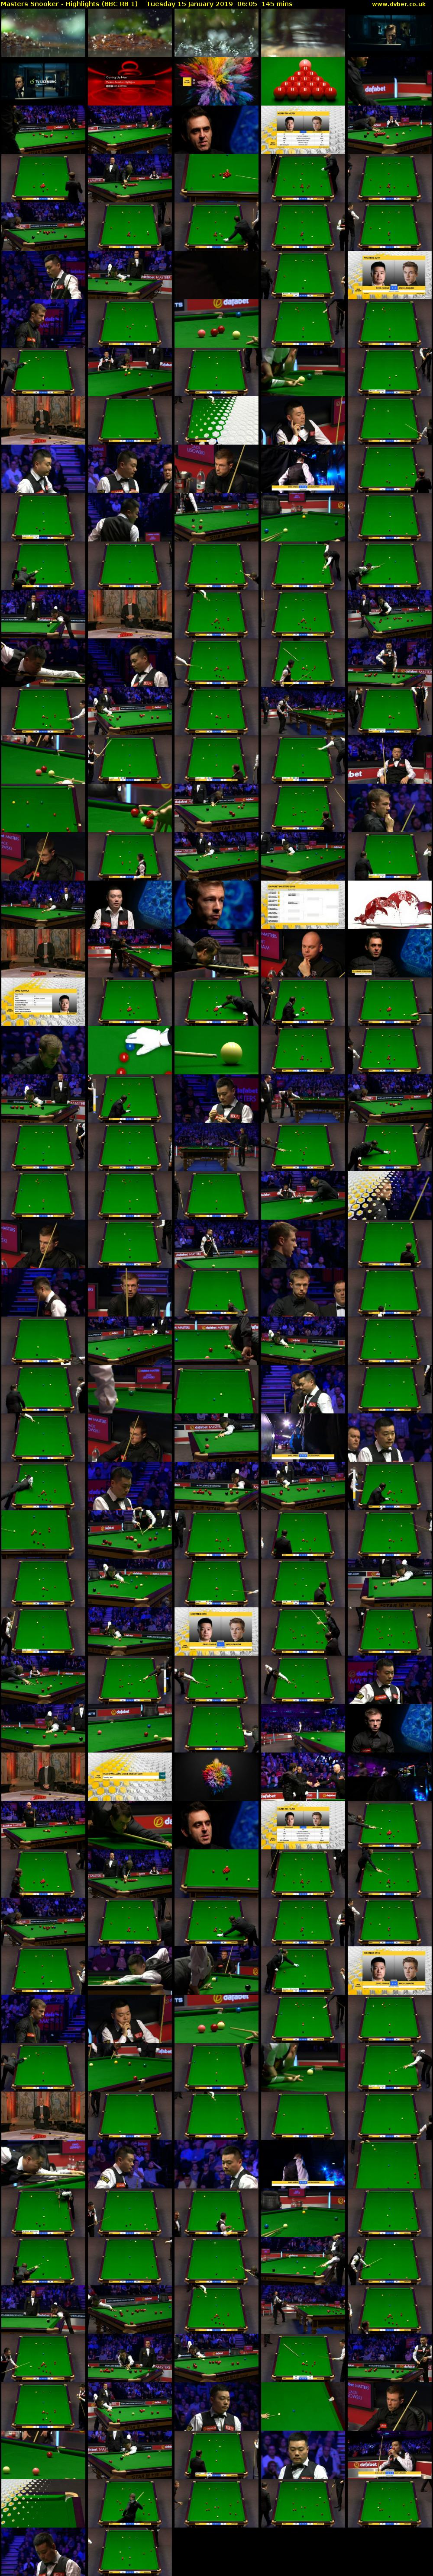 Masters Snooker - Highlights (BBC RB 1) Tuesday 15 January 2019 06:05 - 08:30